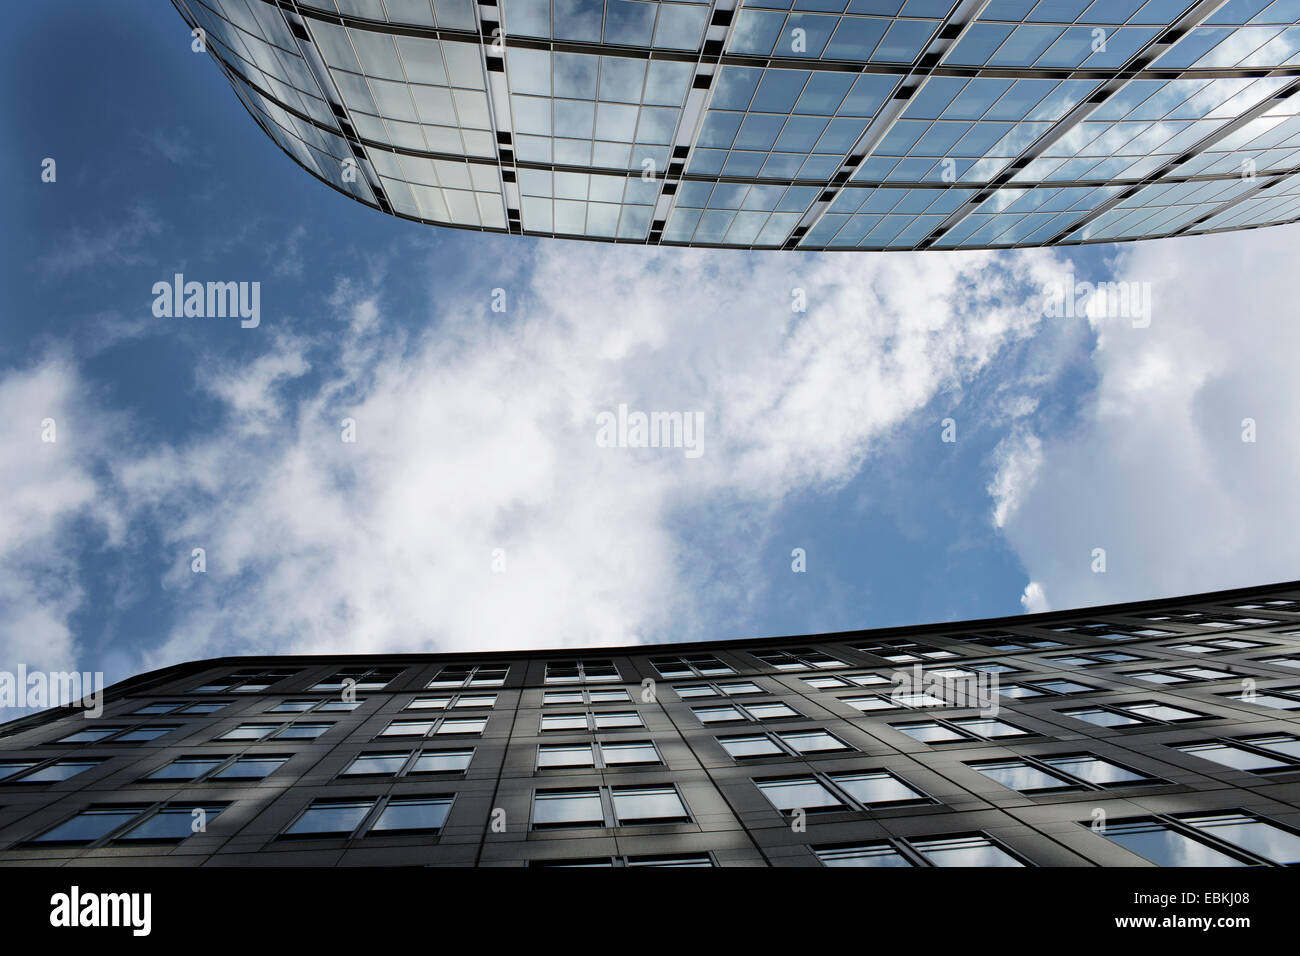 Looking up to the sky between glass tower blocks. Stock Photo